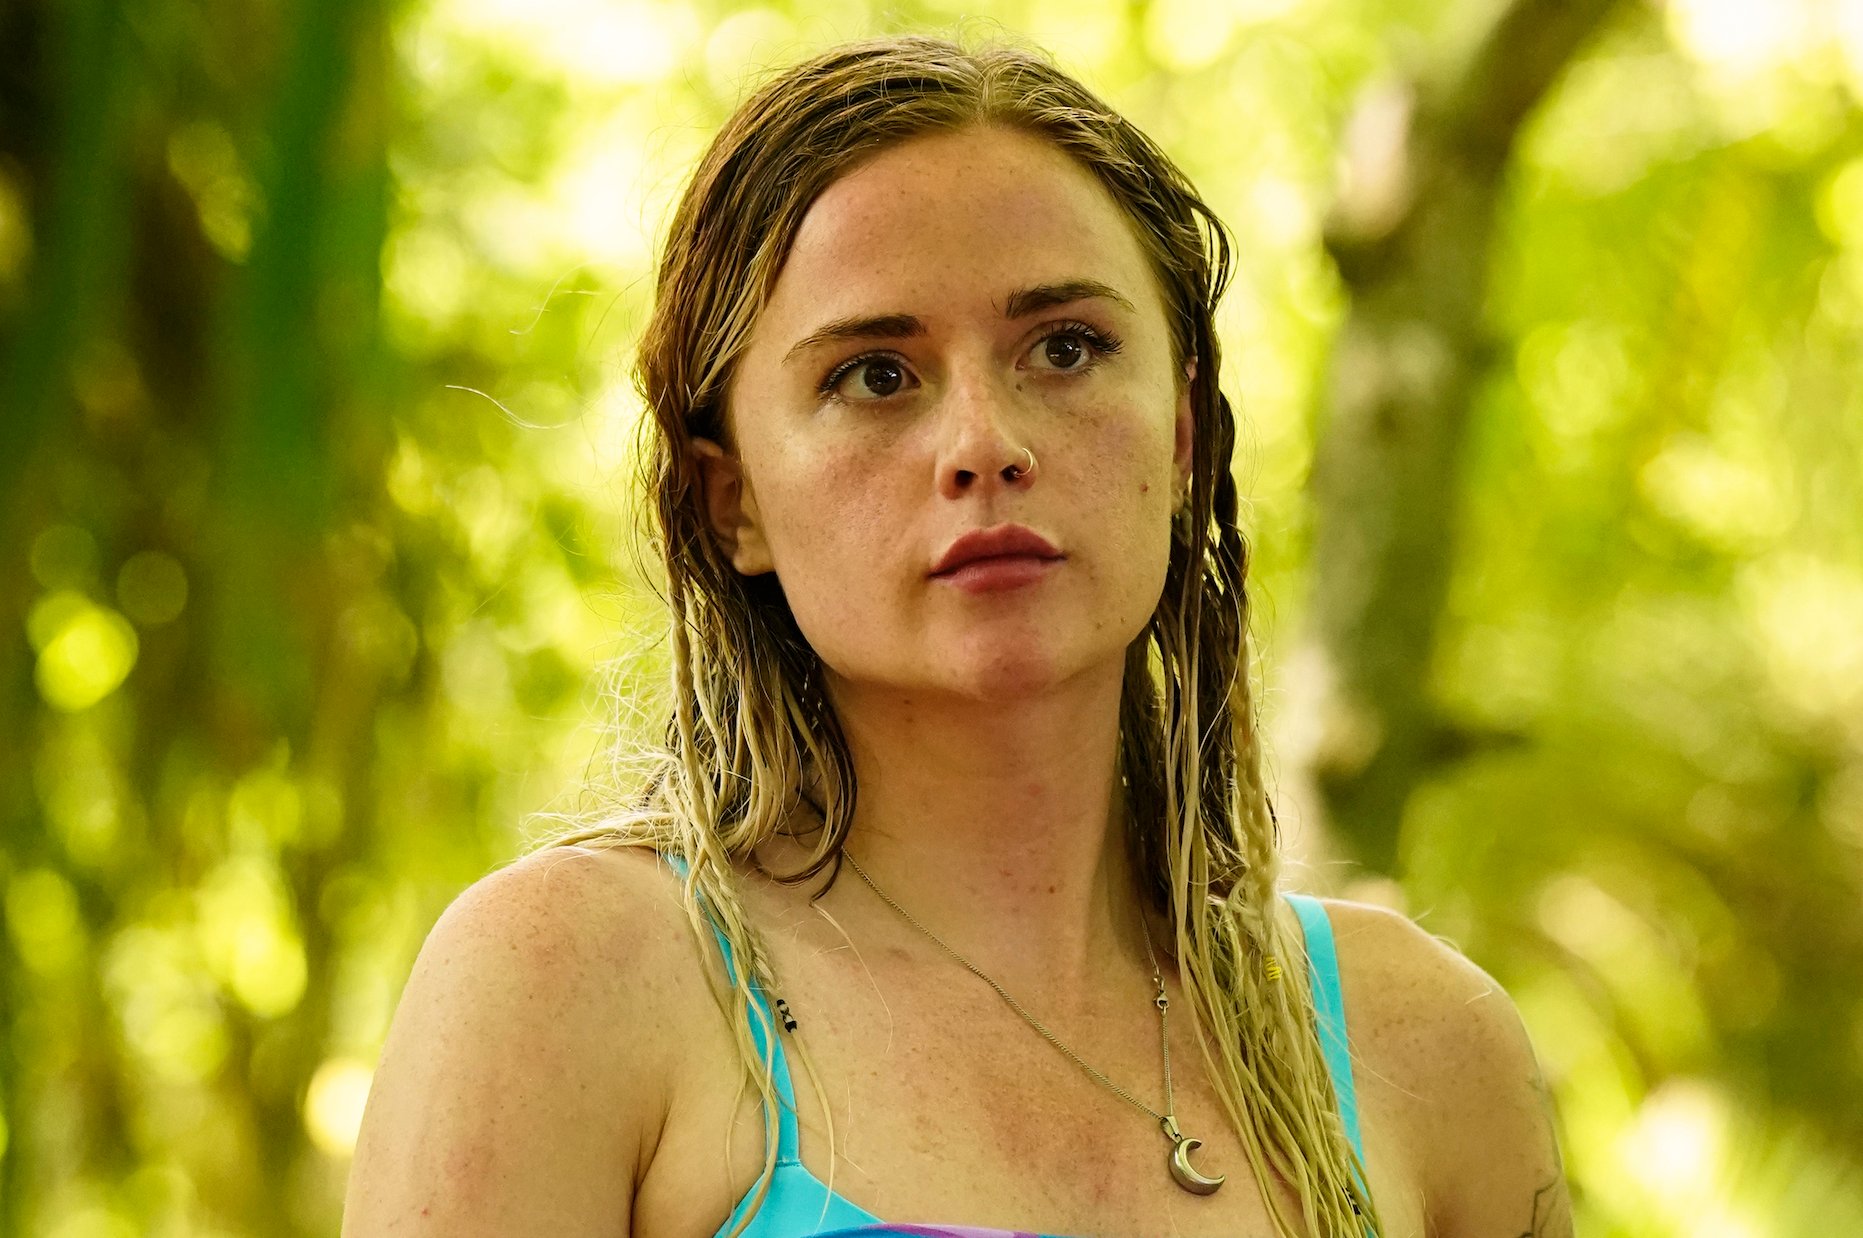 Cassidy Clark stands in the jungle on 'Survivor 43'.